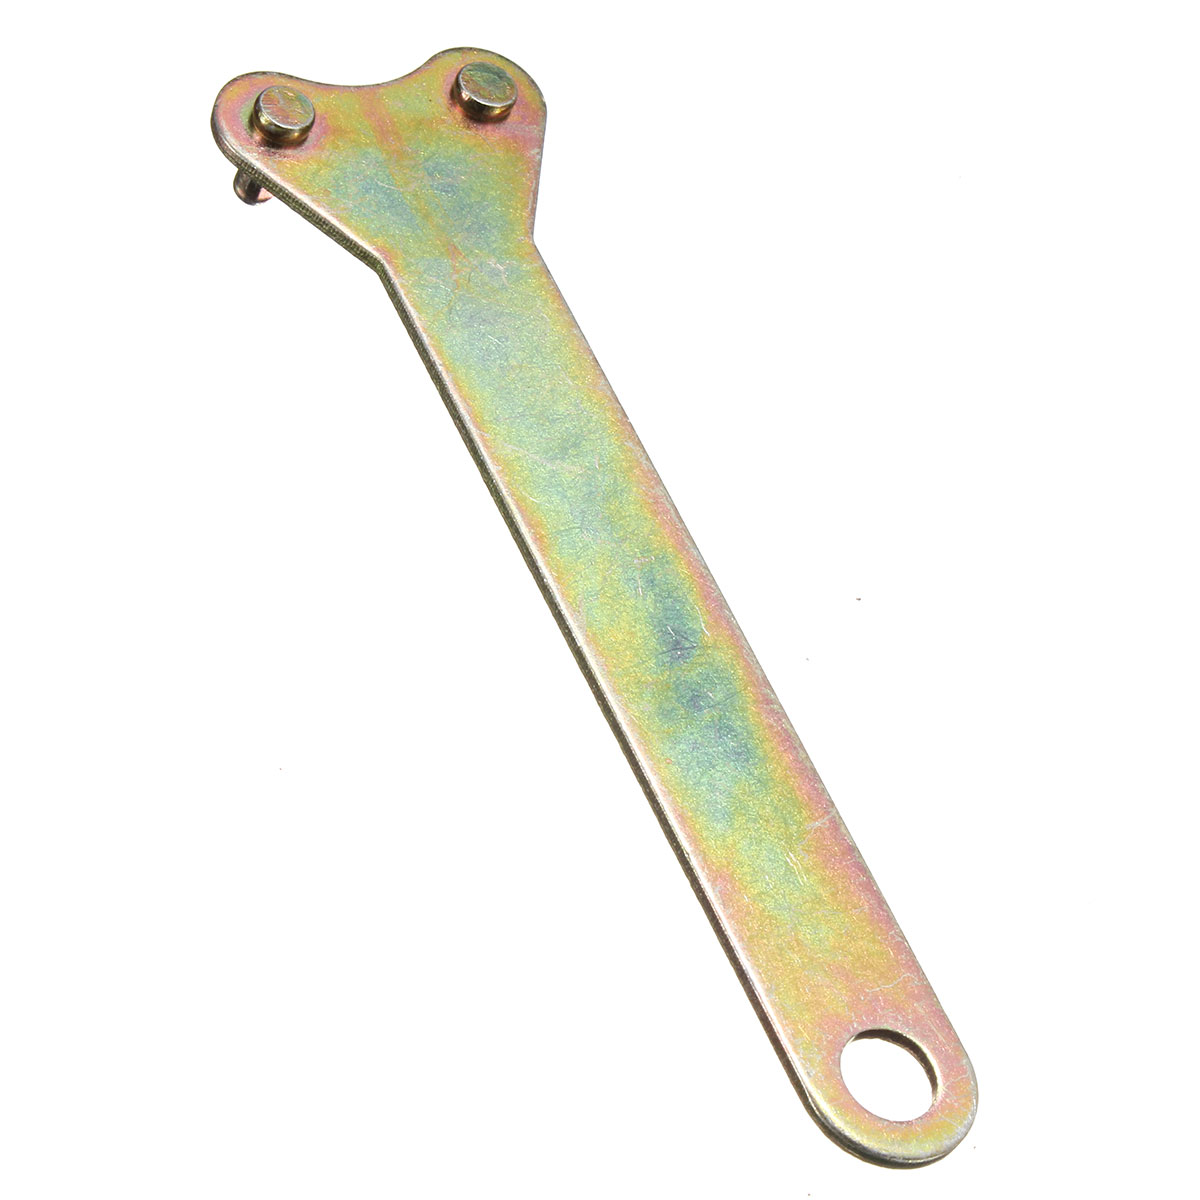 20mm-Metal-Angle-Grinder-Key-Flanged-Wrench-Spanner-1142784